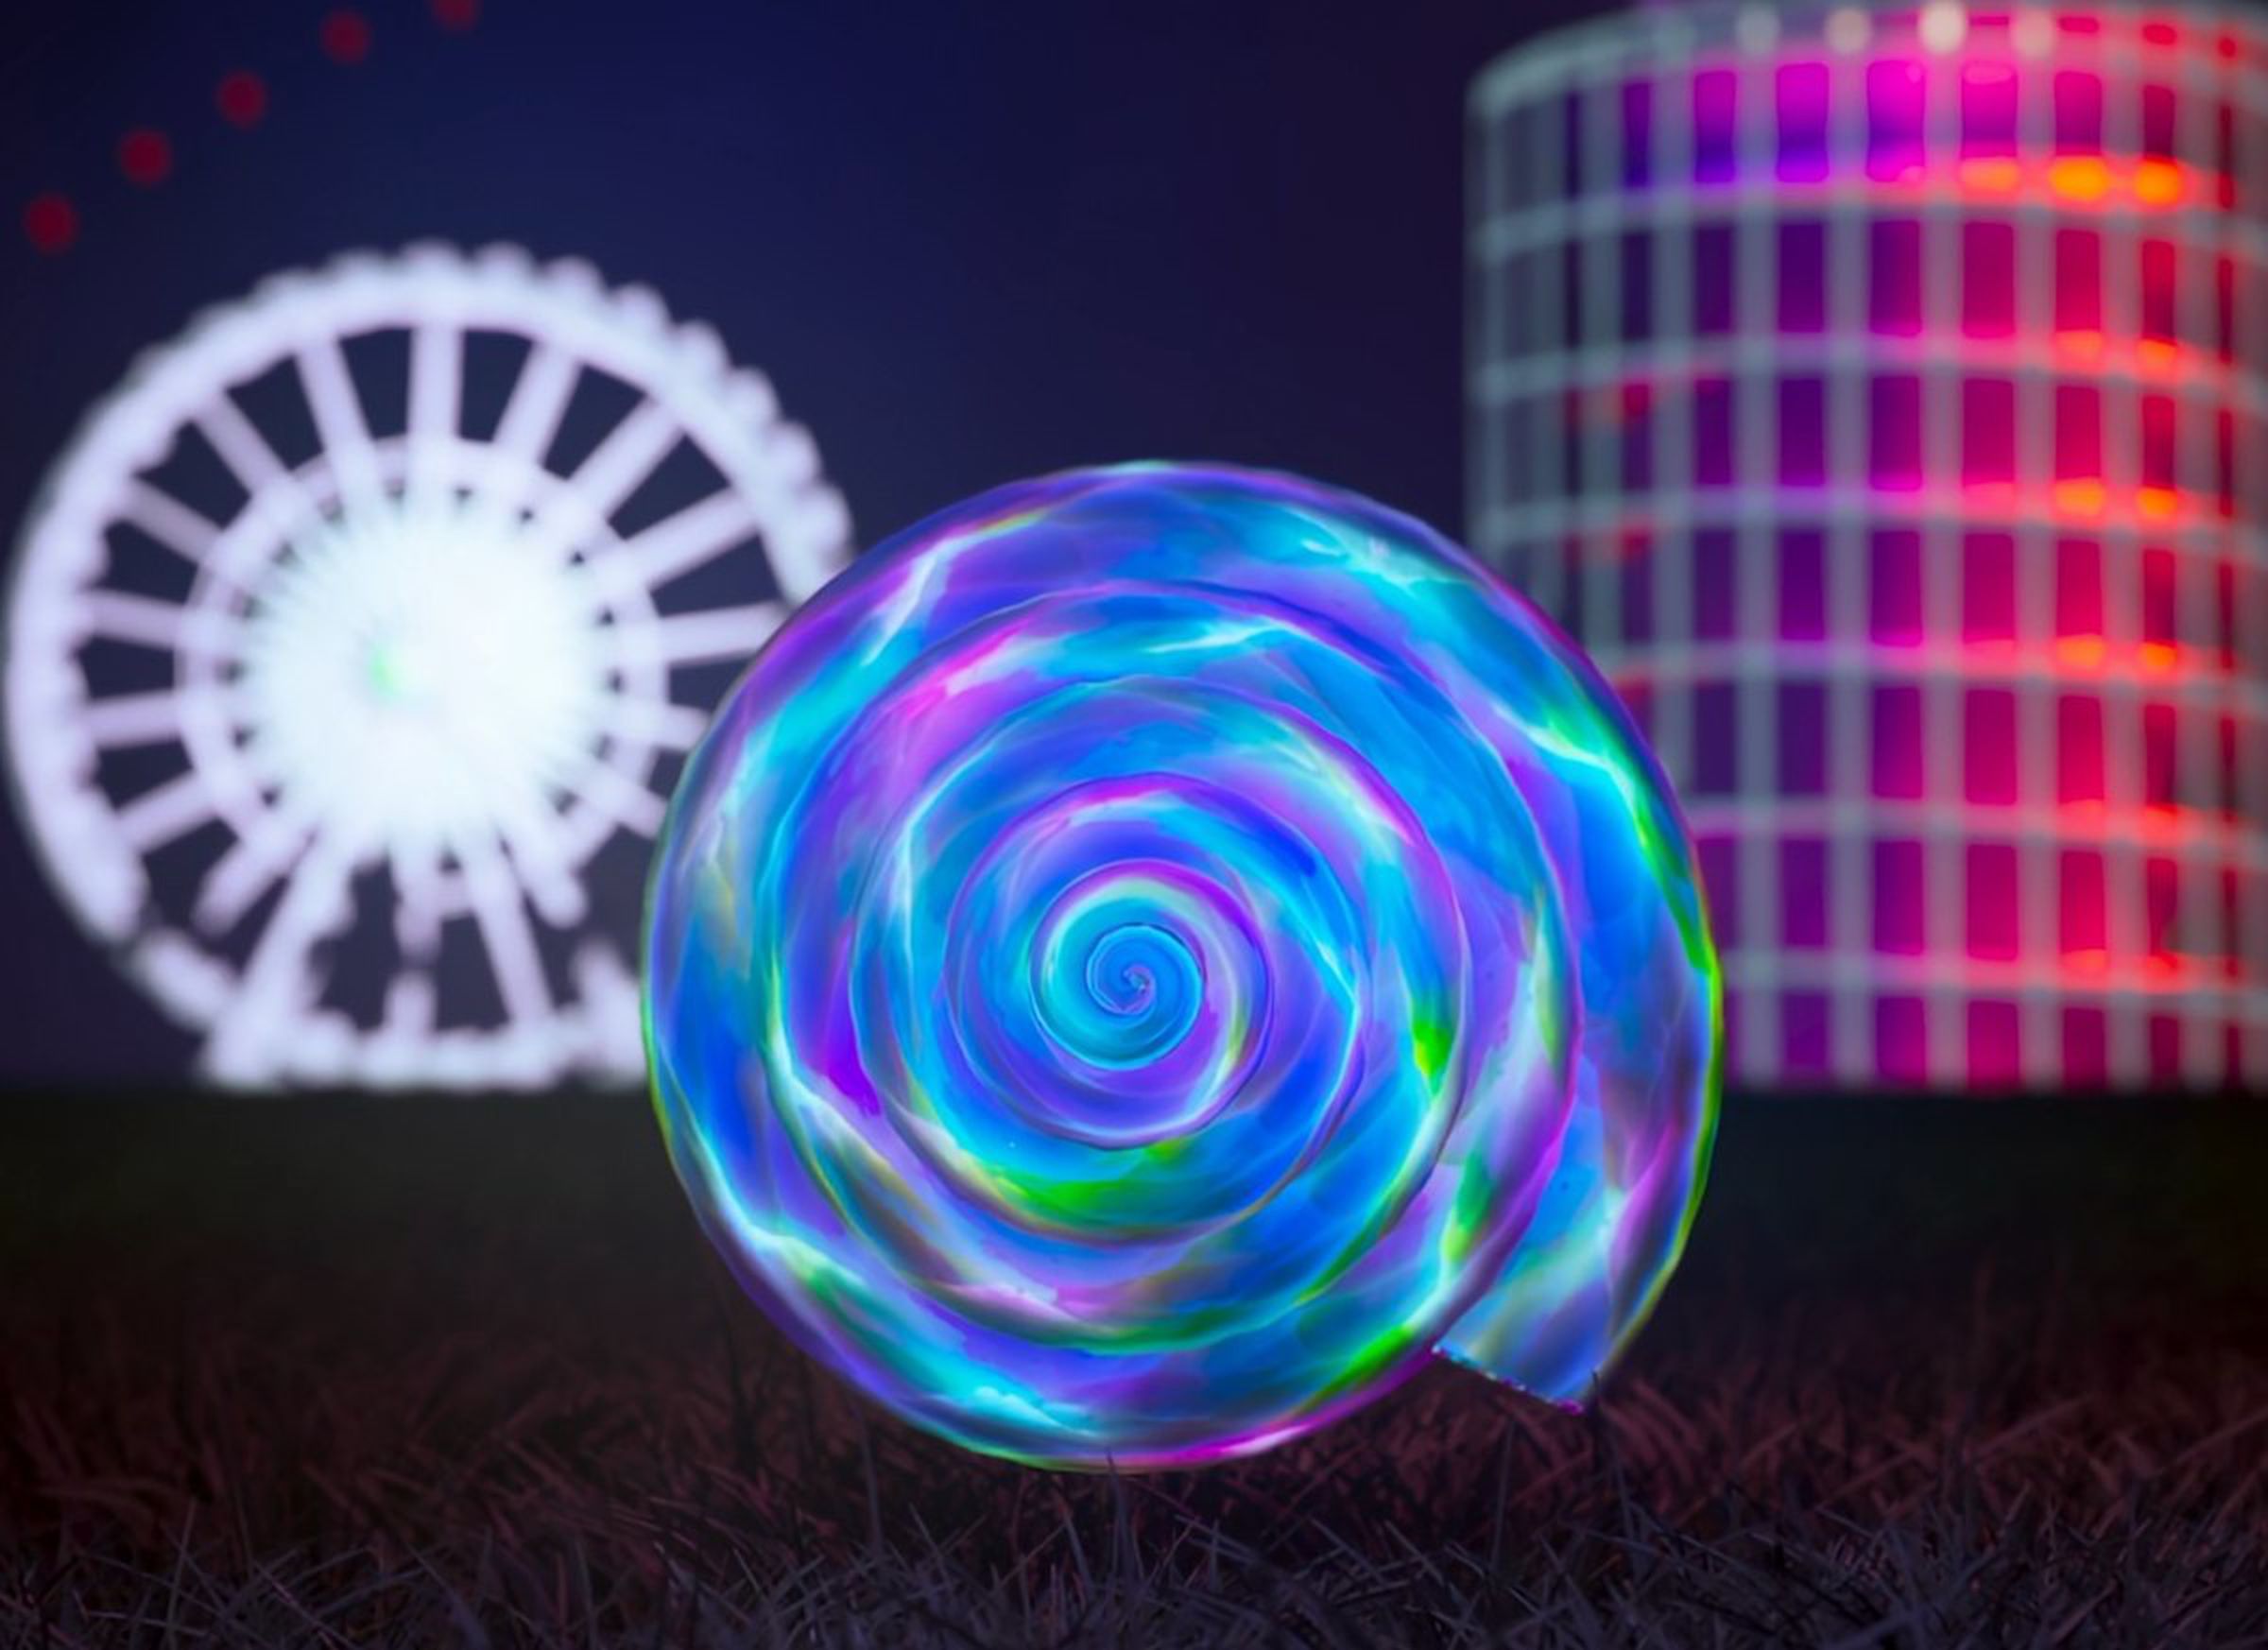 A rendering of a multicolored “shell from a forgotten sea” shown on the field where Coachella takes place.